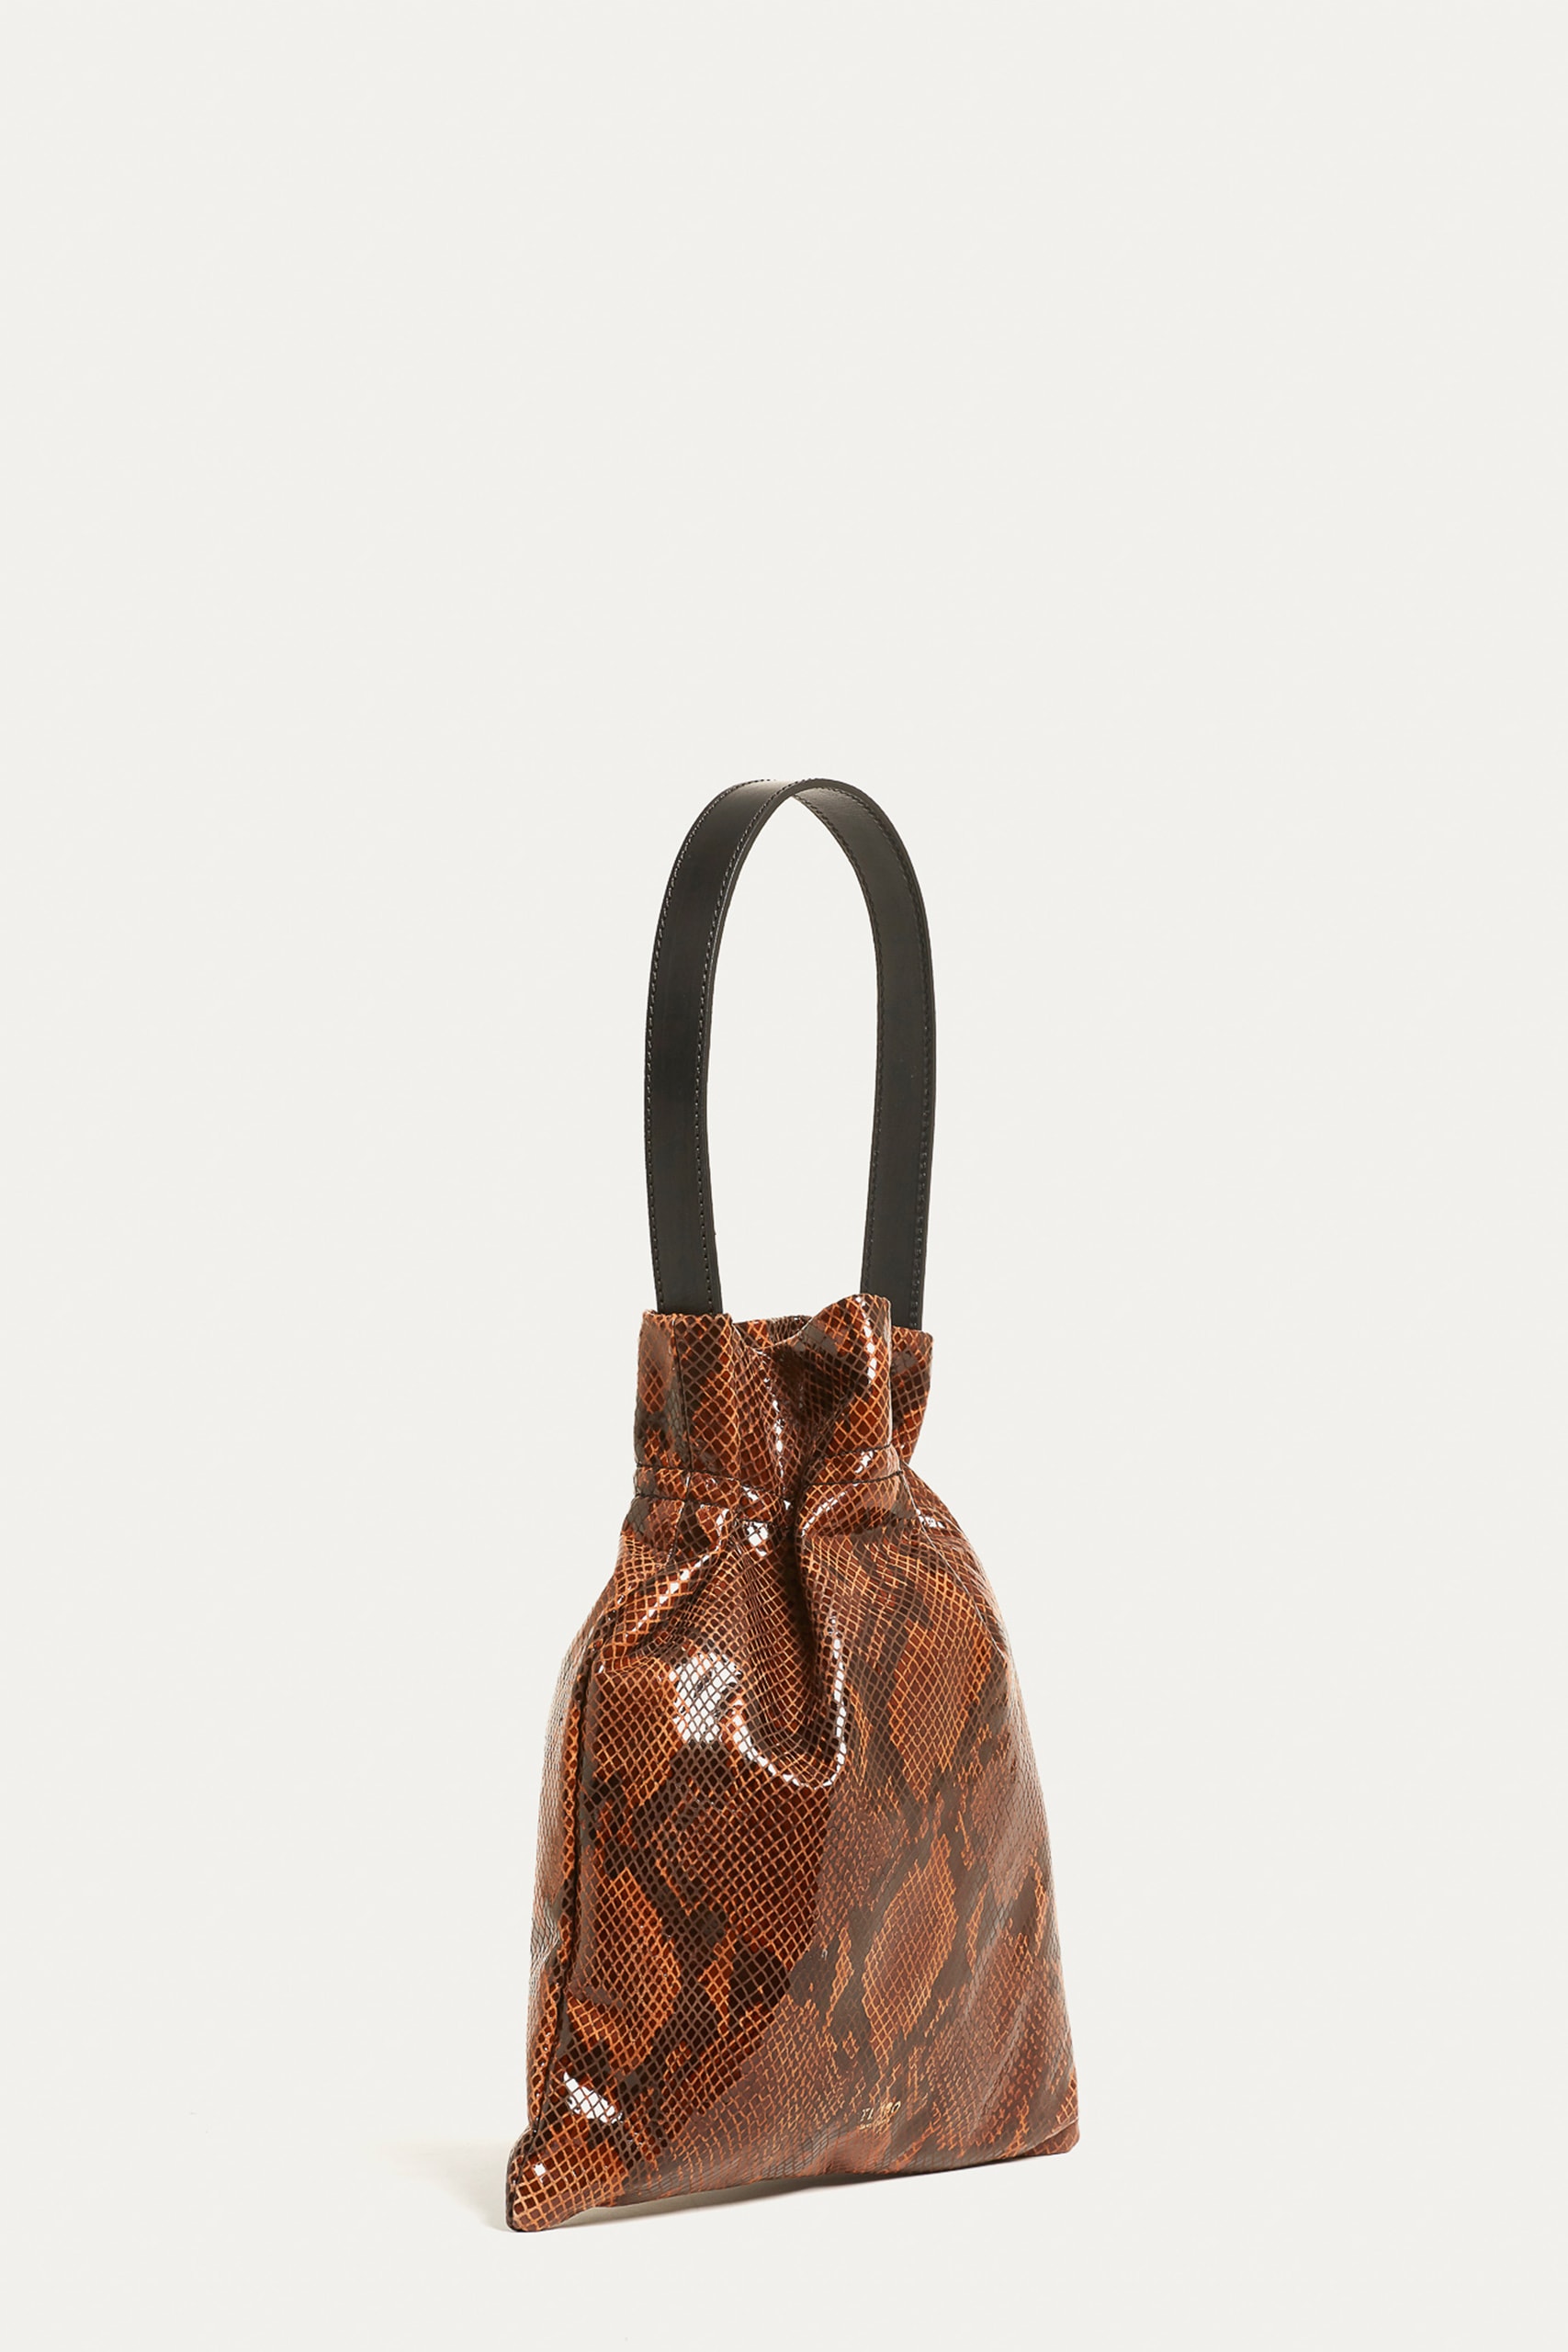 TL180 BAGS FAZZOLETTO LARGE PYTHON BROWN 02